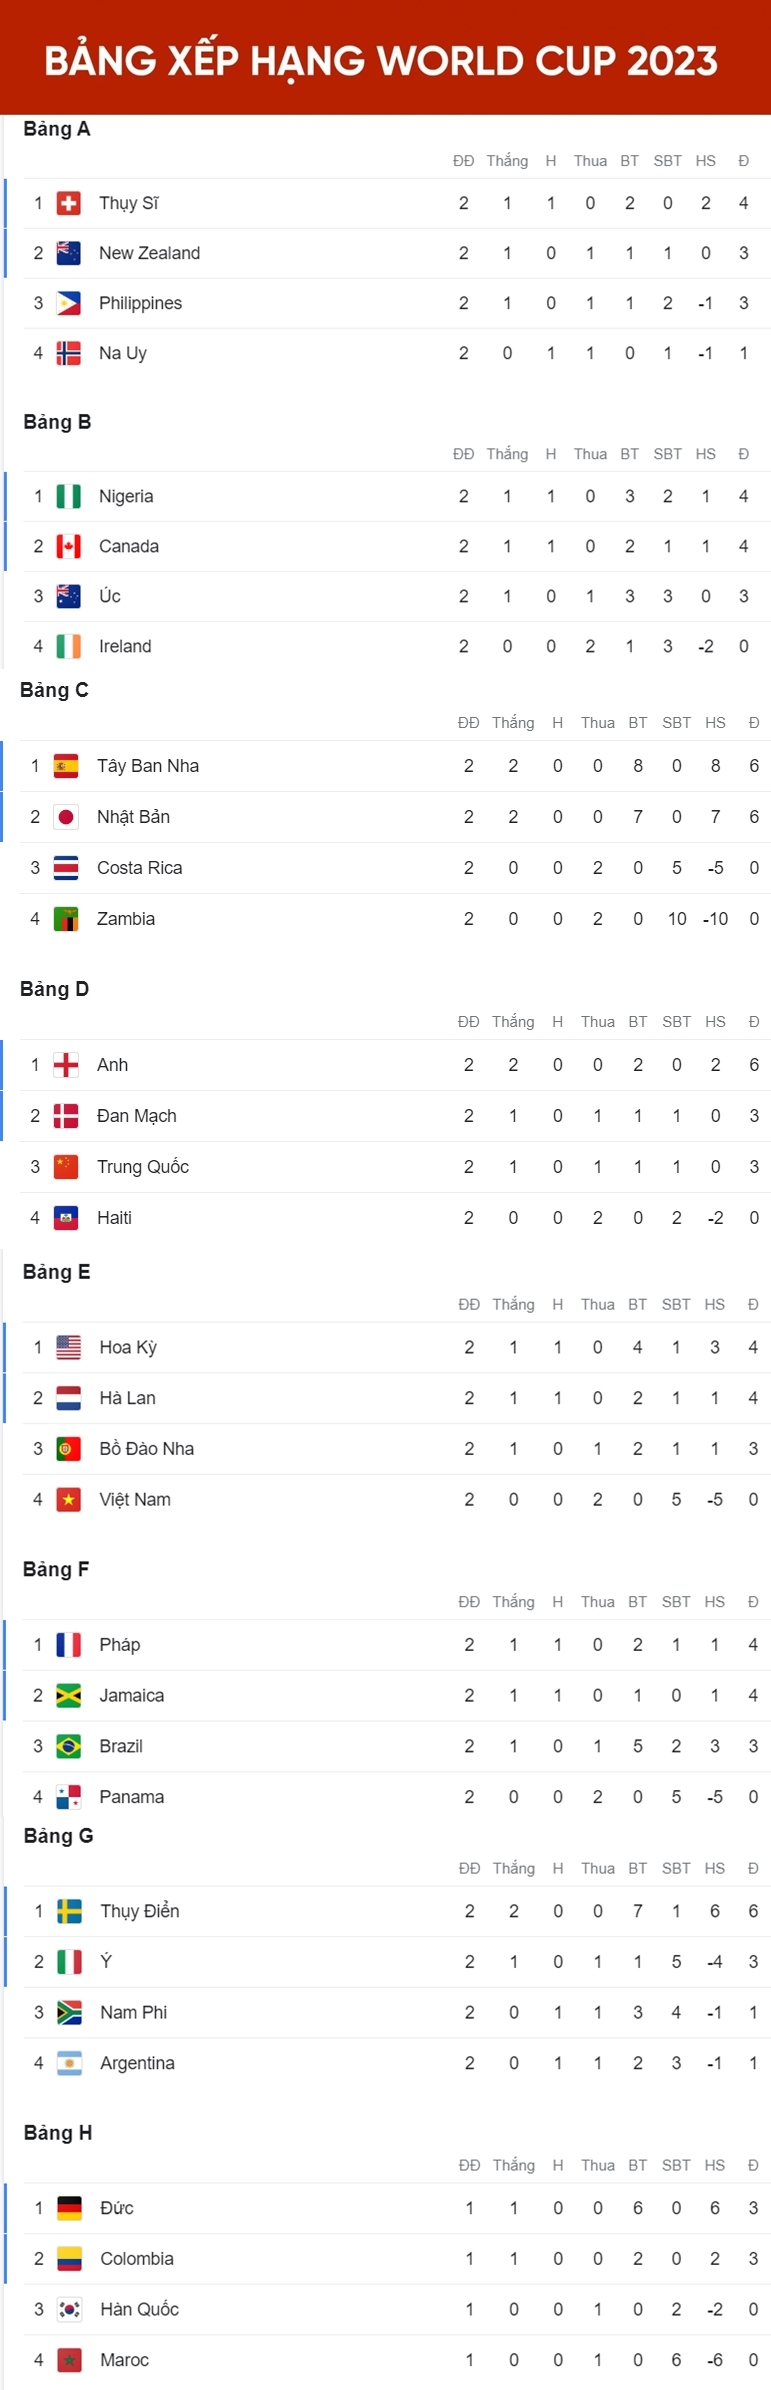 thua 0-6 truoc Dt nu na uy, Dt nu philippines dung buoc o world cup nu 2023 hinh anh 2